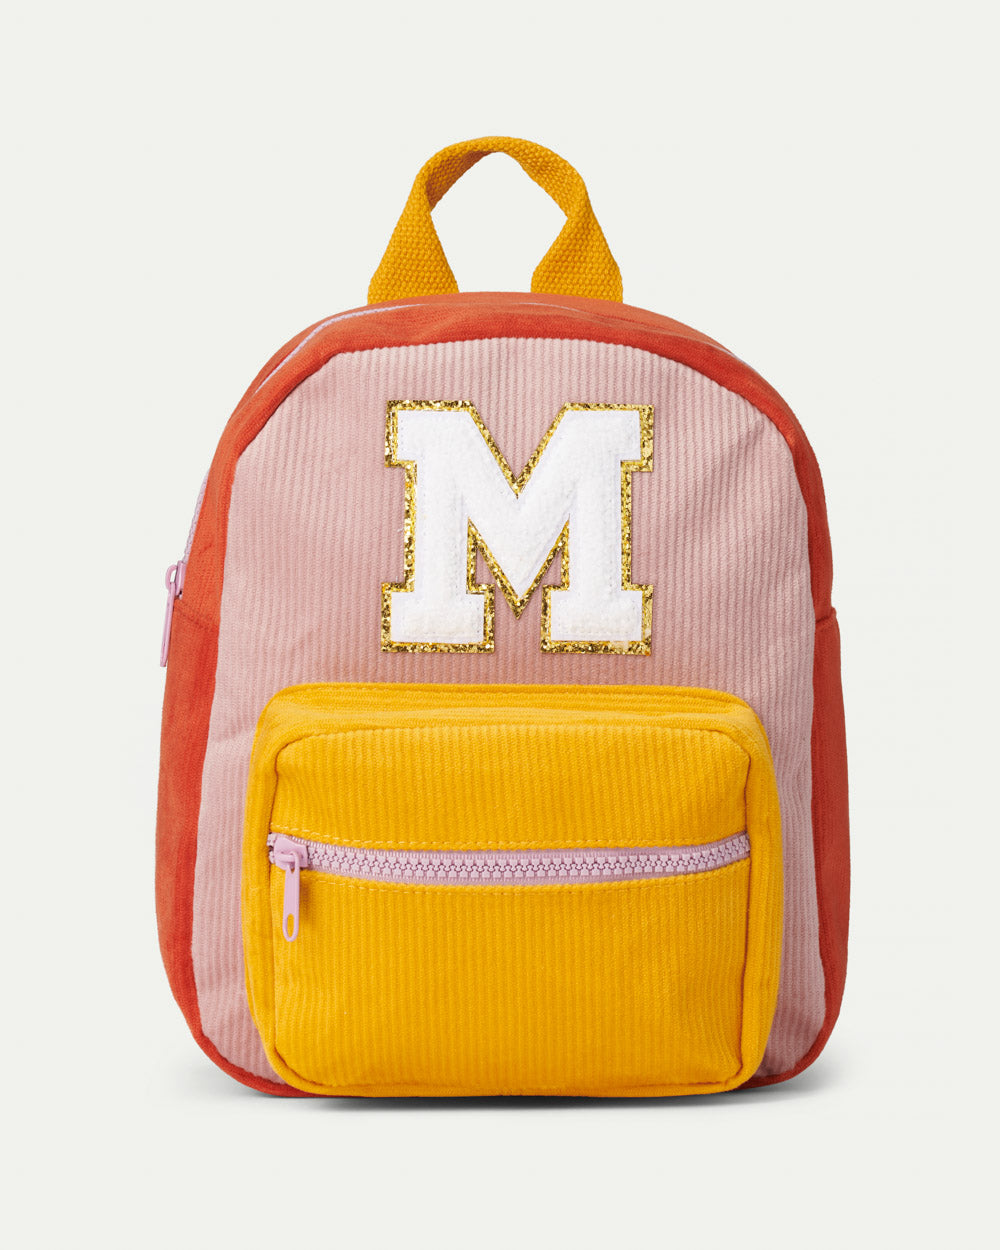 Girls Initial Cord Backpack - Small Stuff Accessories